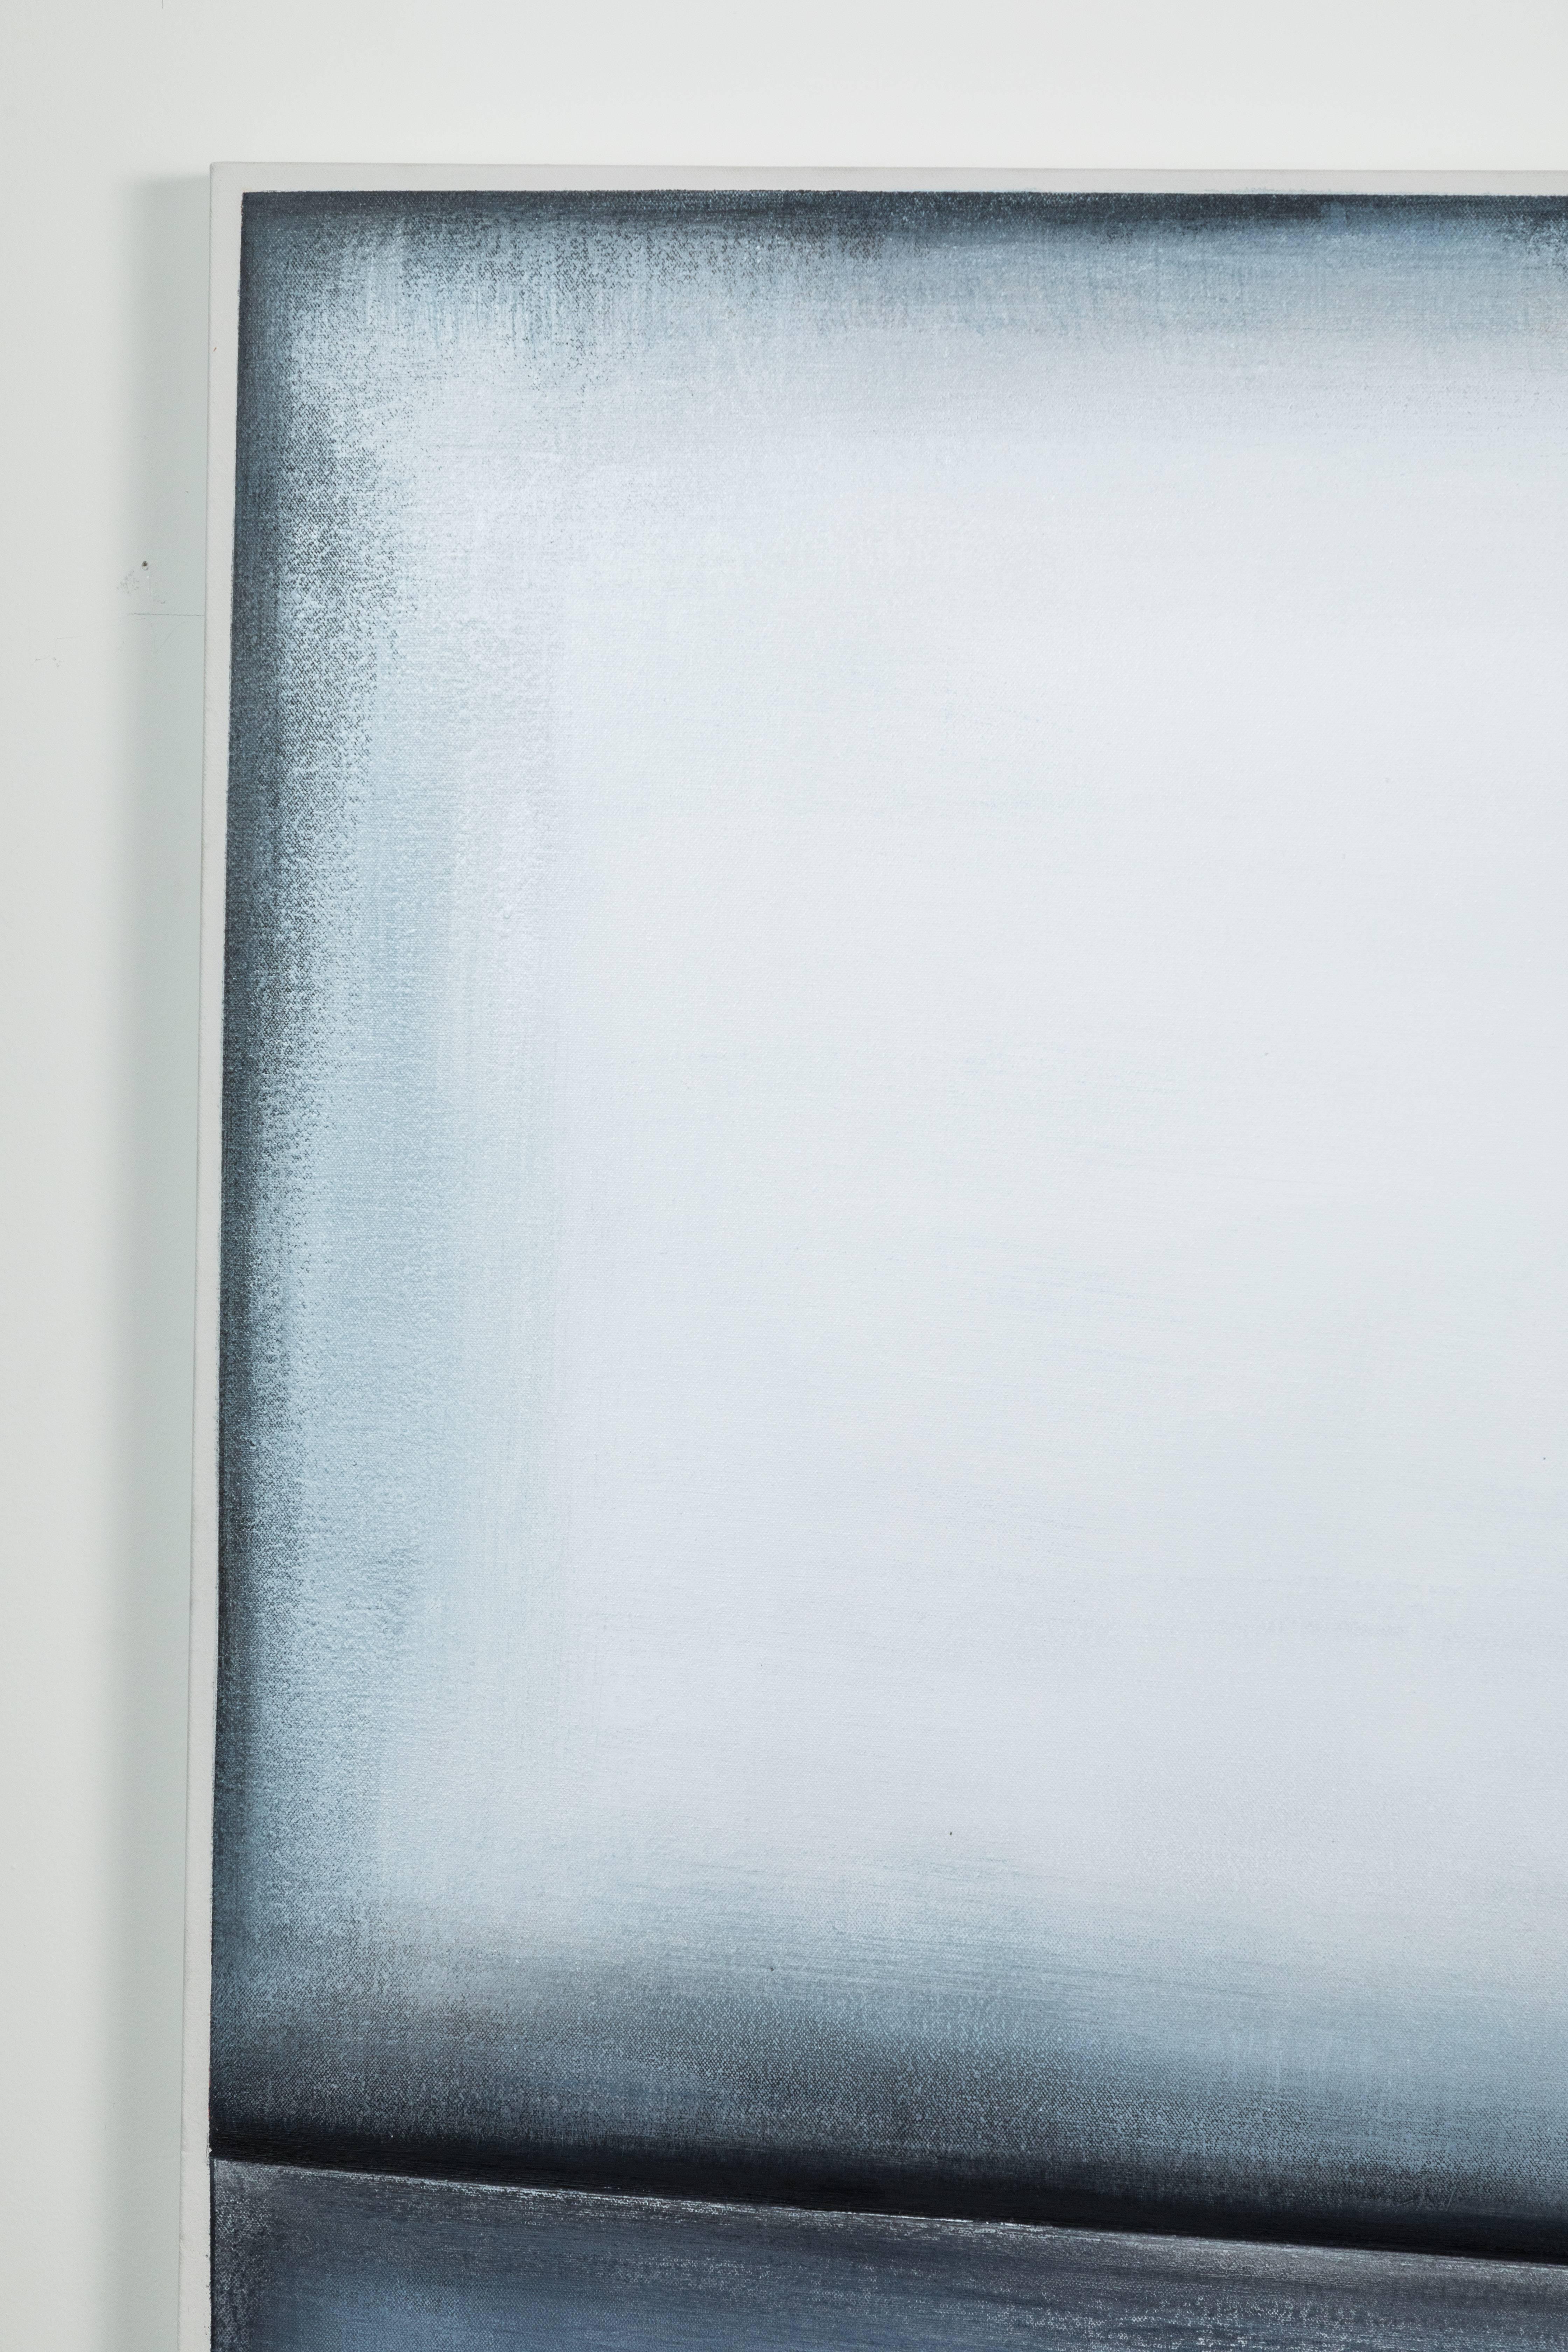 Large, bold, abstract, acrylic on canvas by artist Michele Tholen. Shades of blue-grays, charcoals and white are painted in colorblock fashion, reminiscent of the style of Mark Rothko. Although the canvas is photographed vertically, it may be